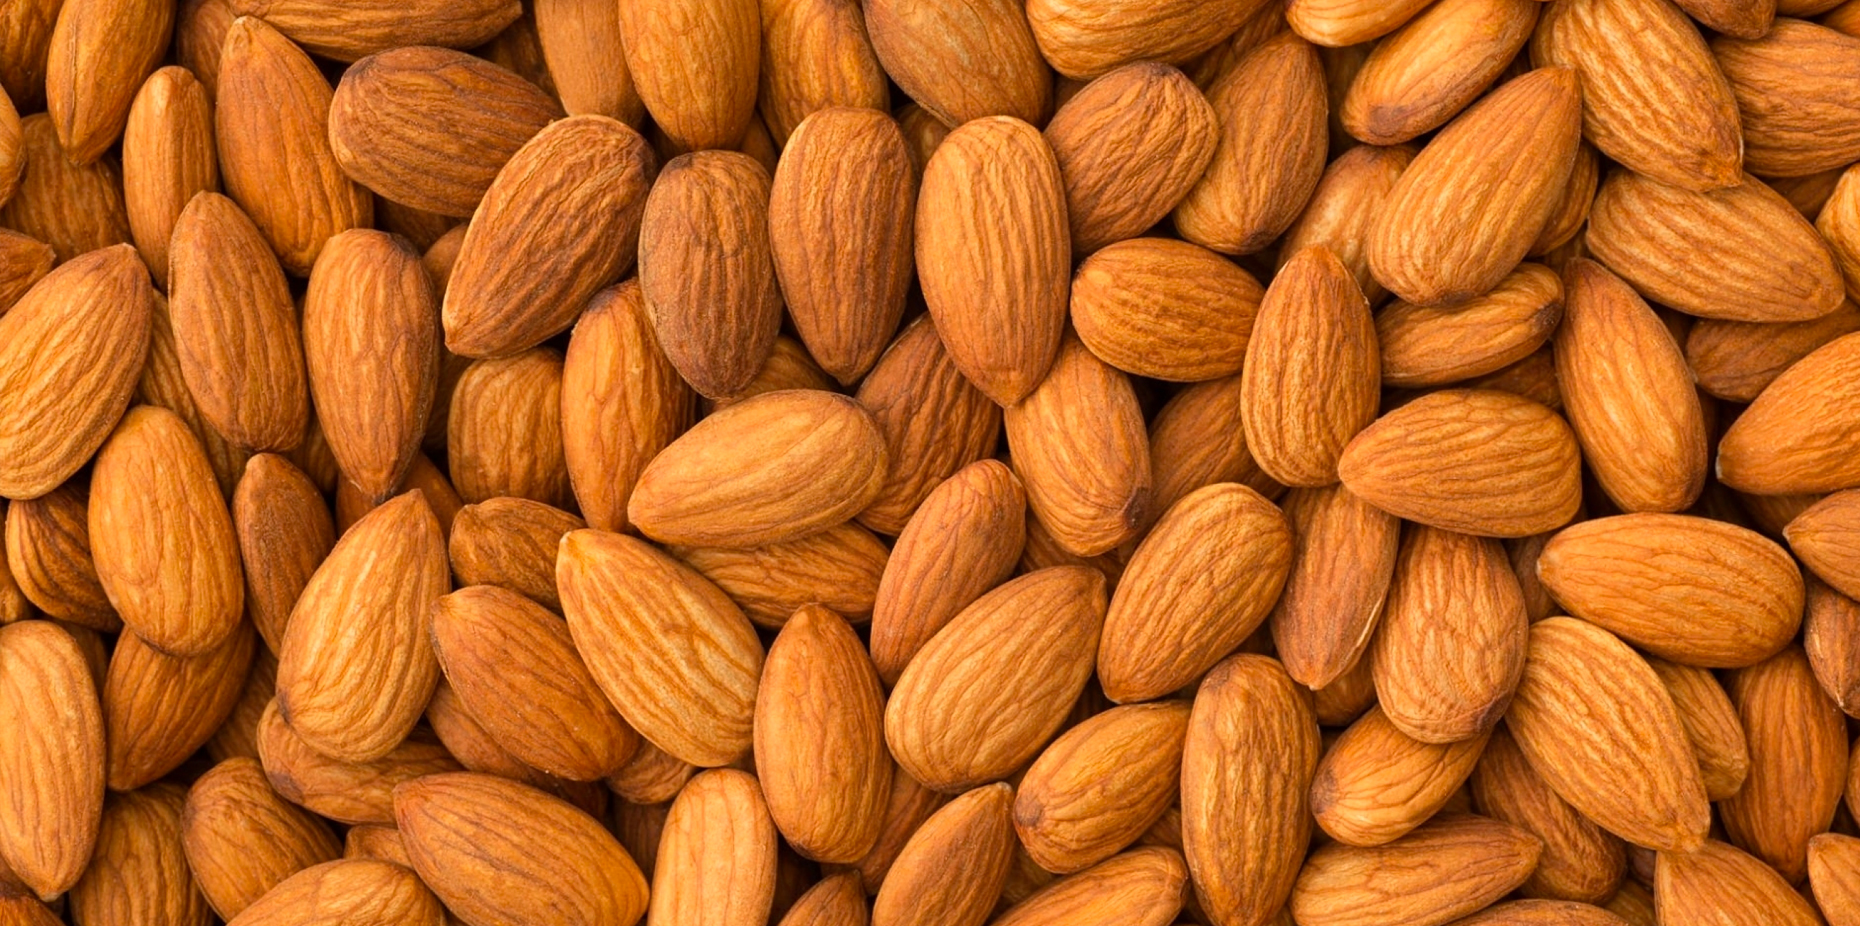 Almonds: Facts, Nutrition, Benefits, & More